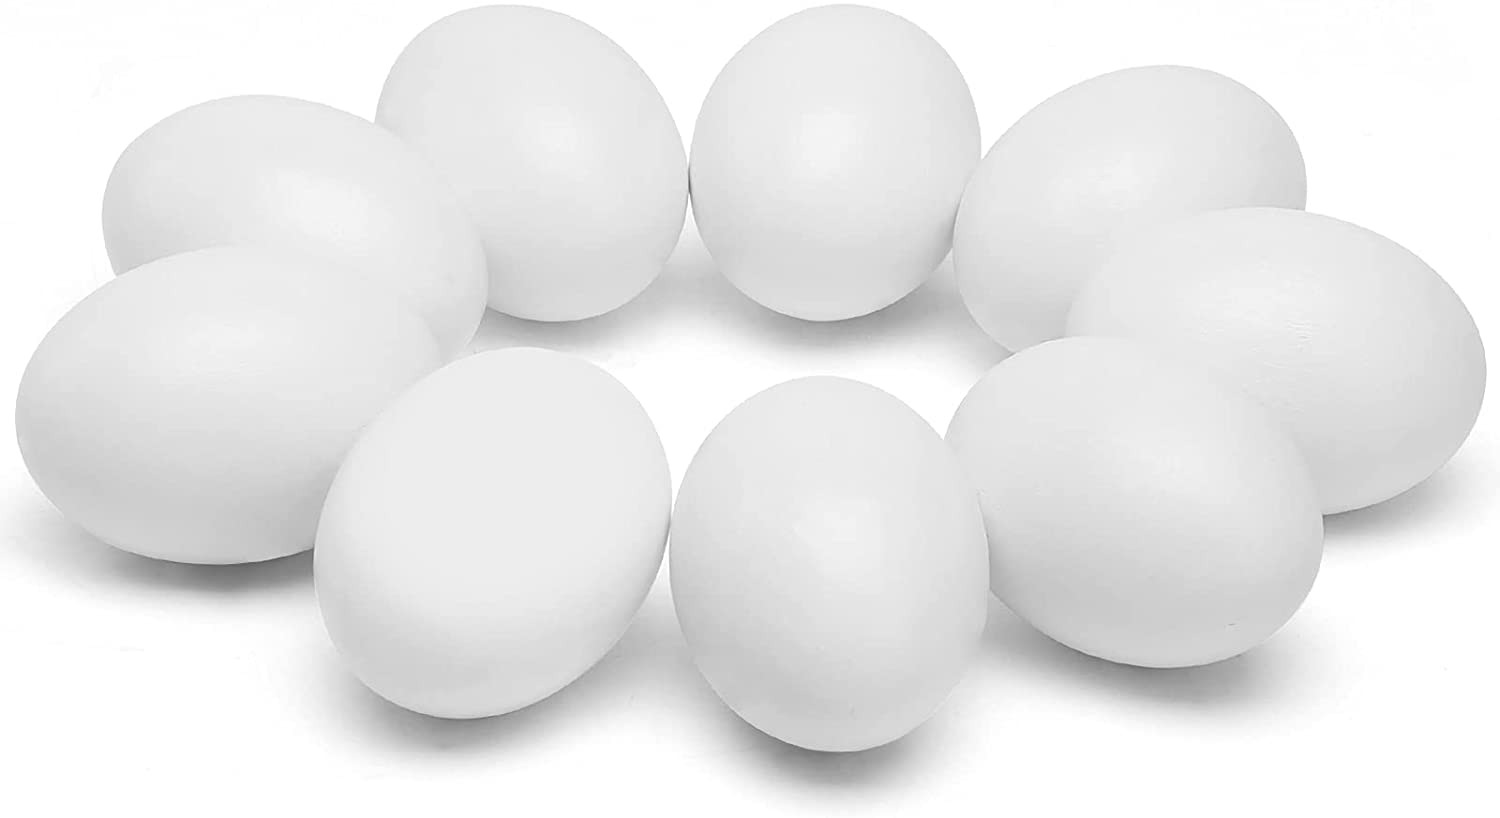 Wooden Fake Eggs,9 Pieces White Wooden Easter Egg Wood Eggs for Crafts Easter Ho